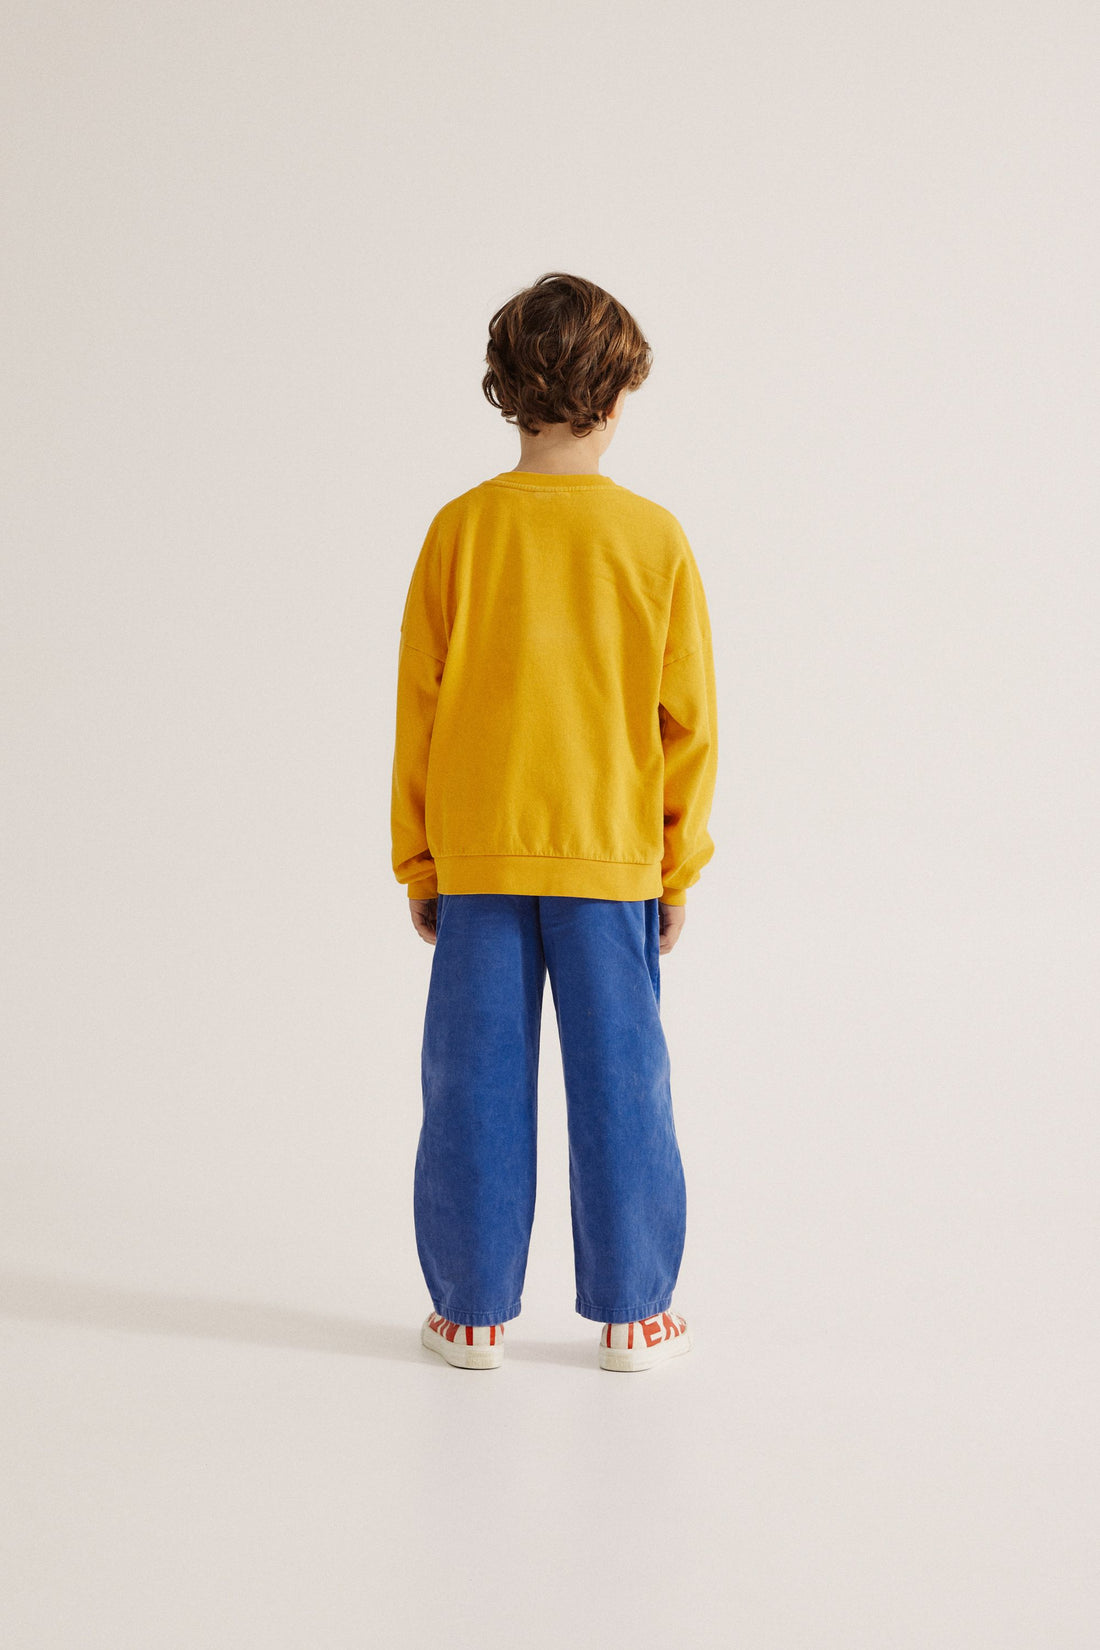 The Campamento - Blue washed kids trousers - Blue